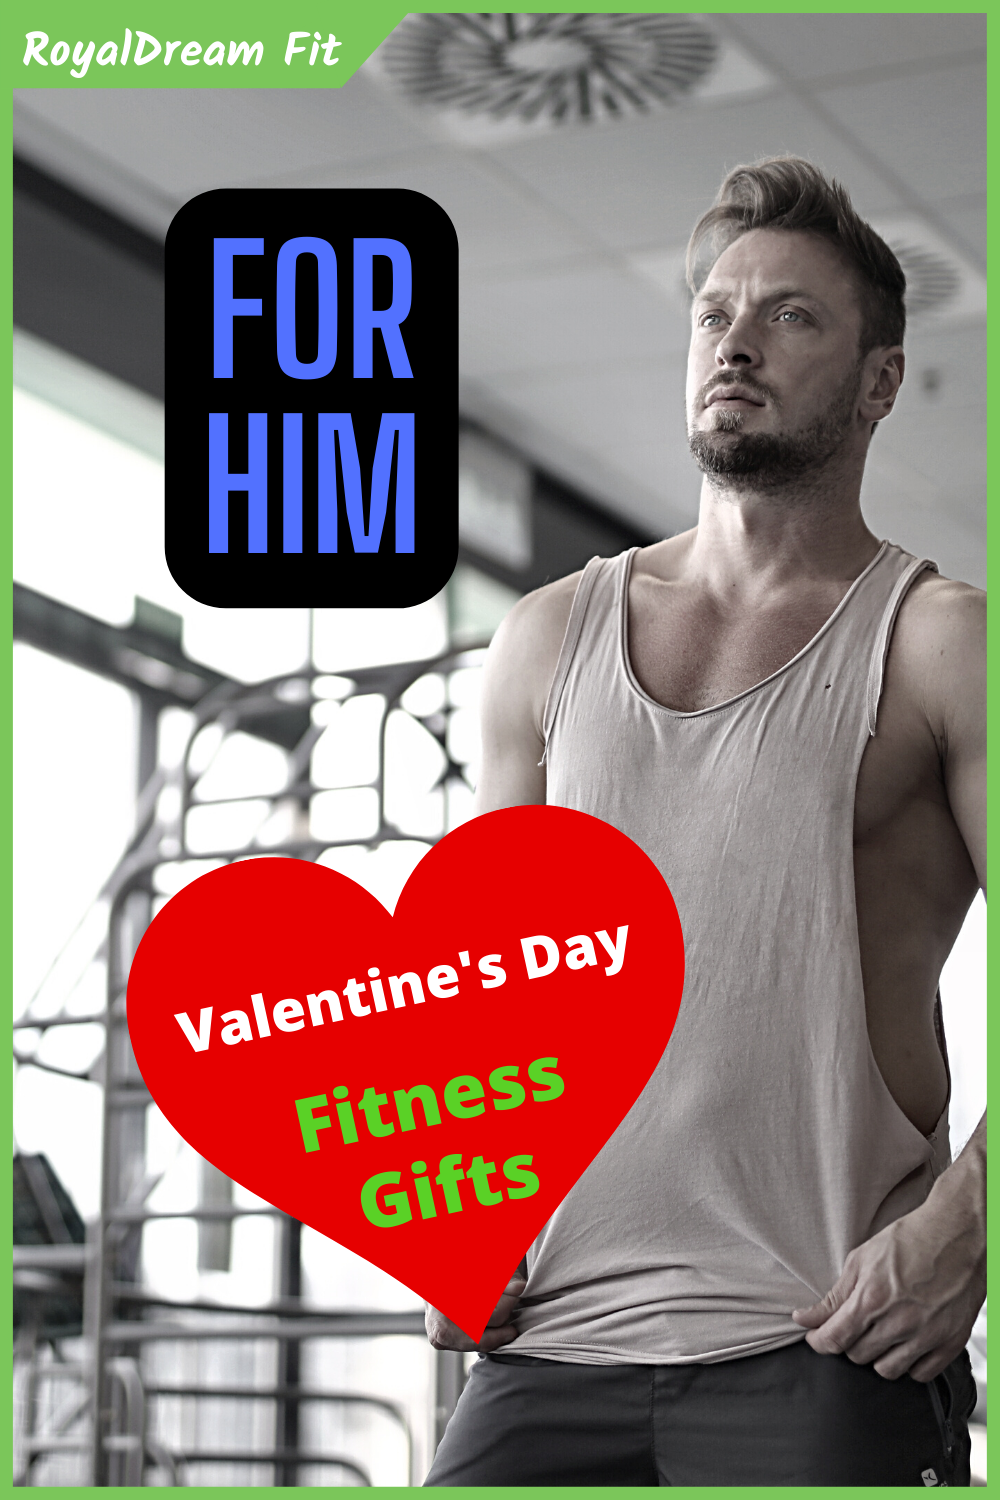 Unique Valentine's Day Gifts for your fit man!